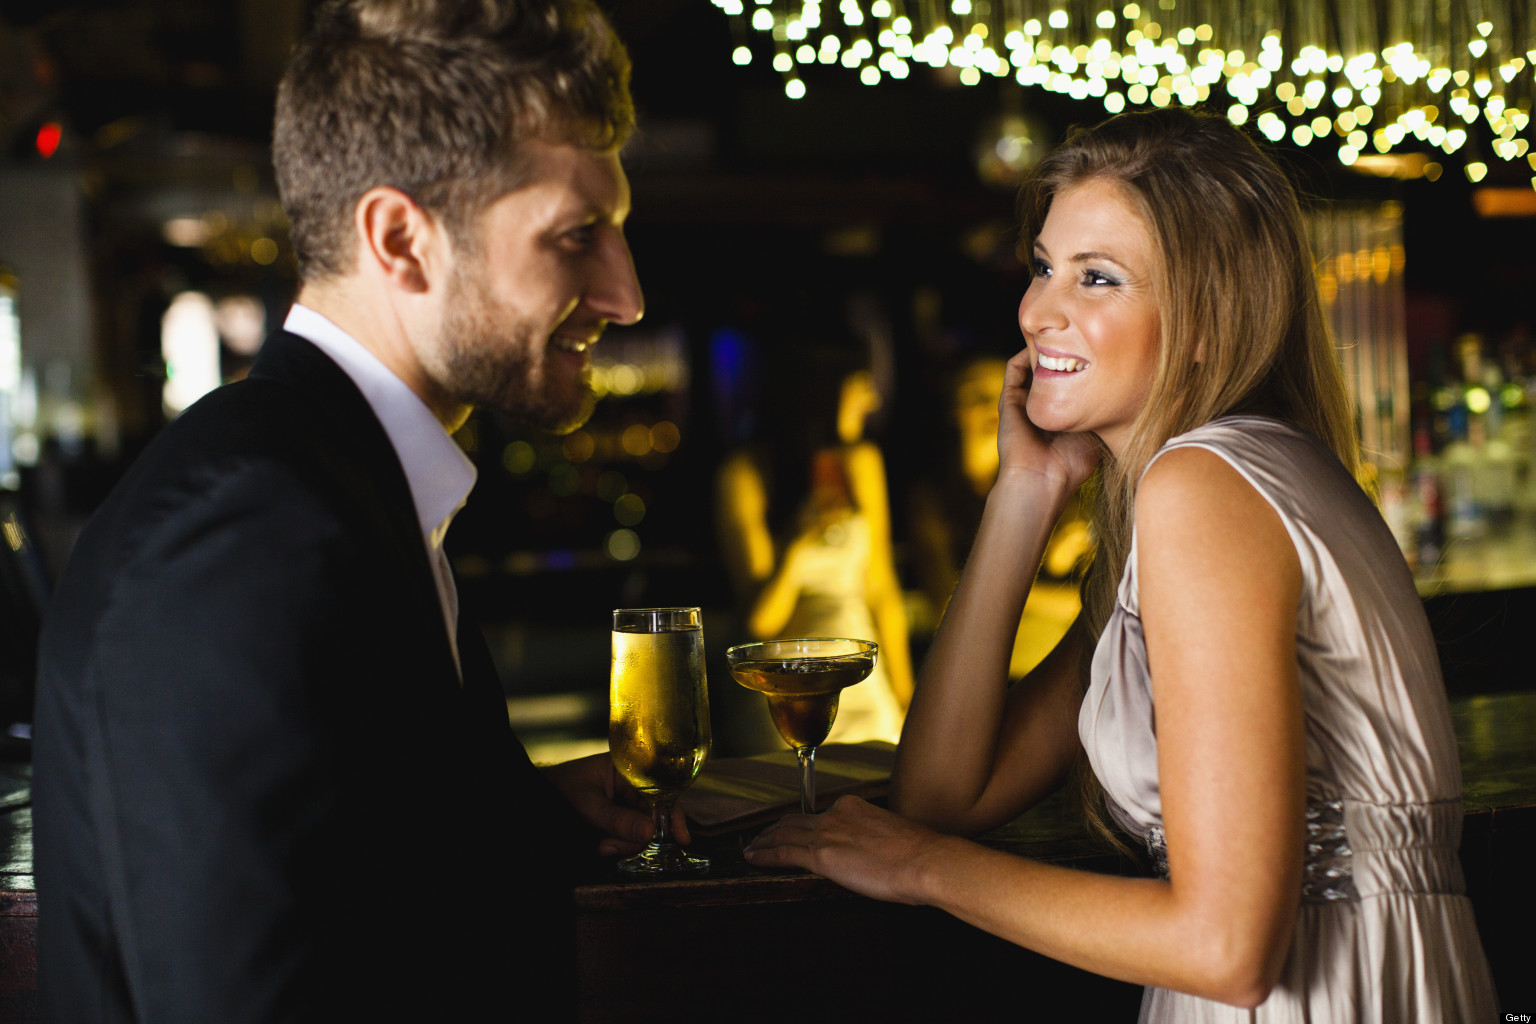 5 Keys to Start Conversations With Girls That Lead to Dates